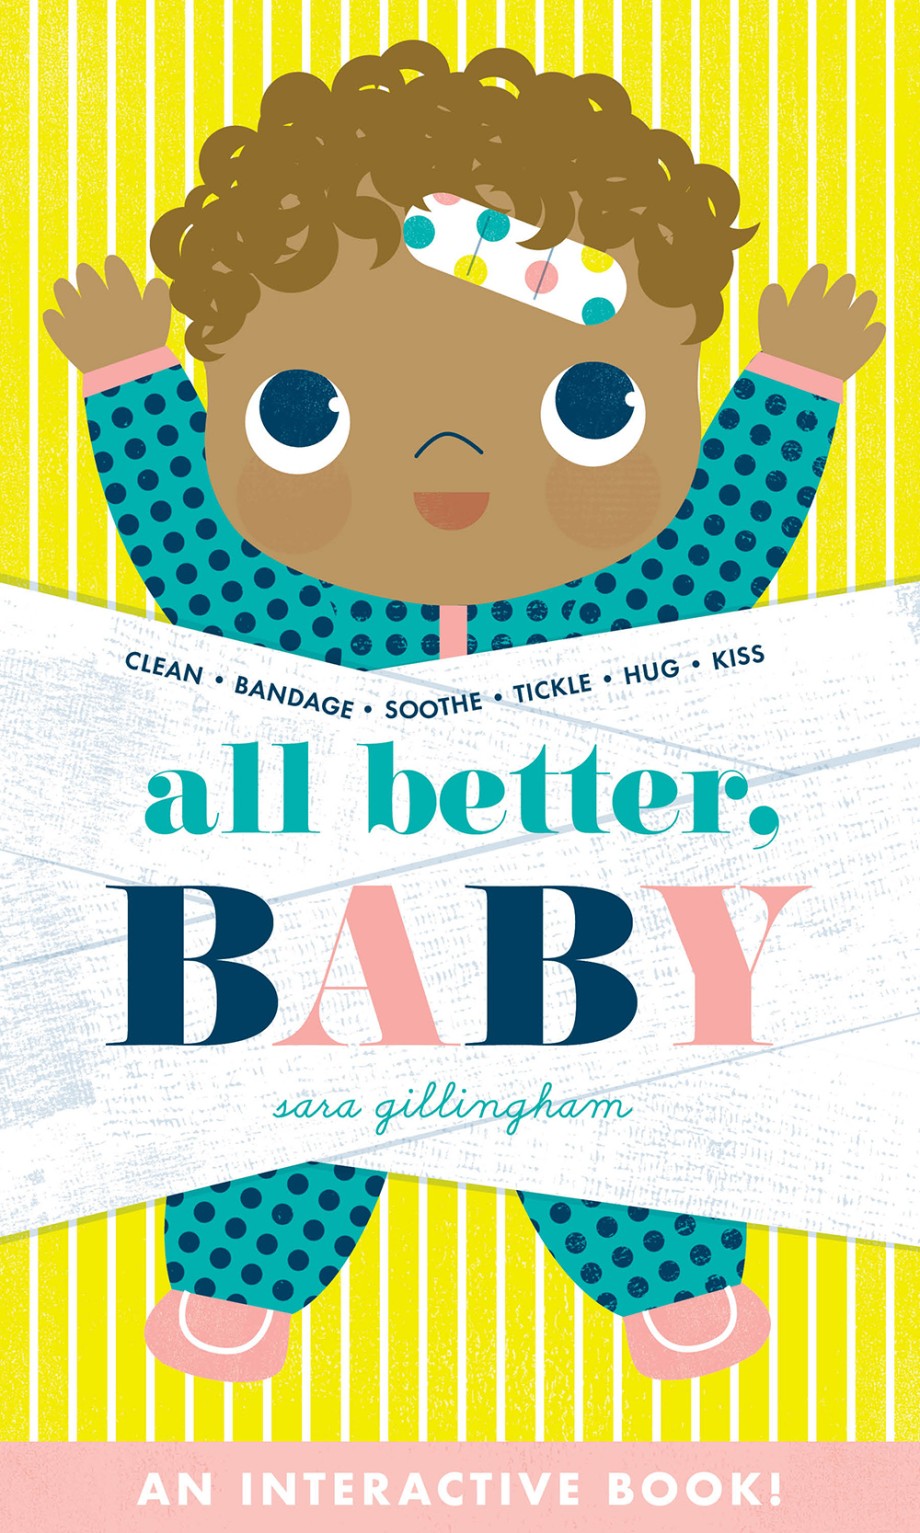 All Better, Baby! A Board Book